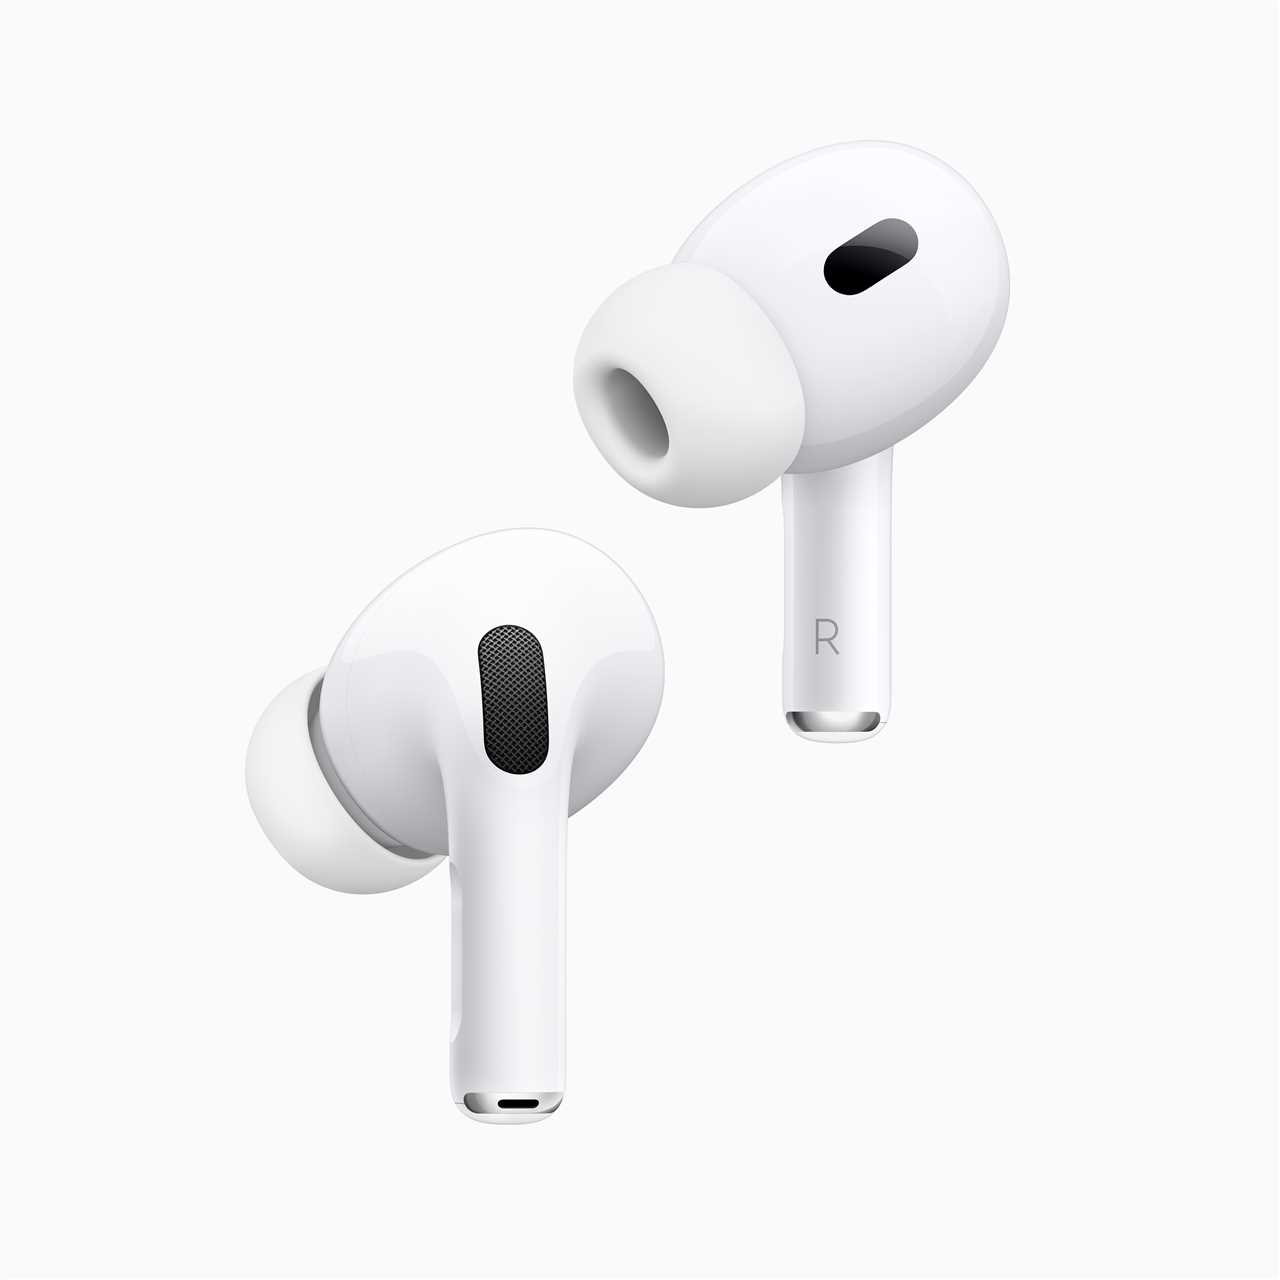 Key Features of Apple Earbuds: